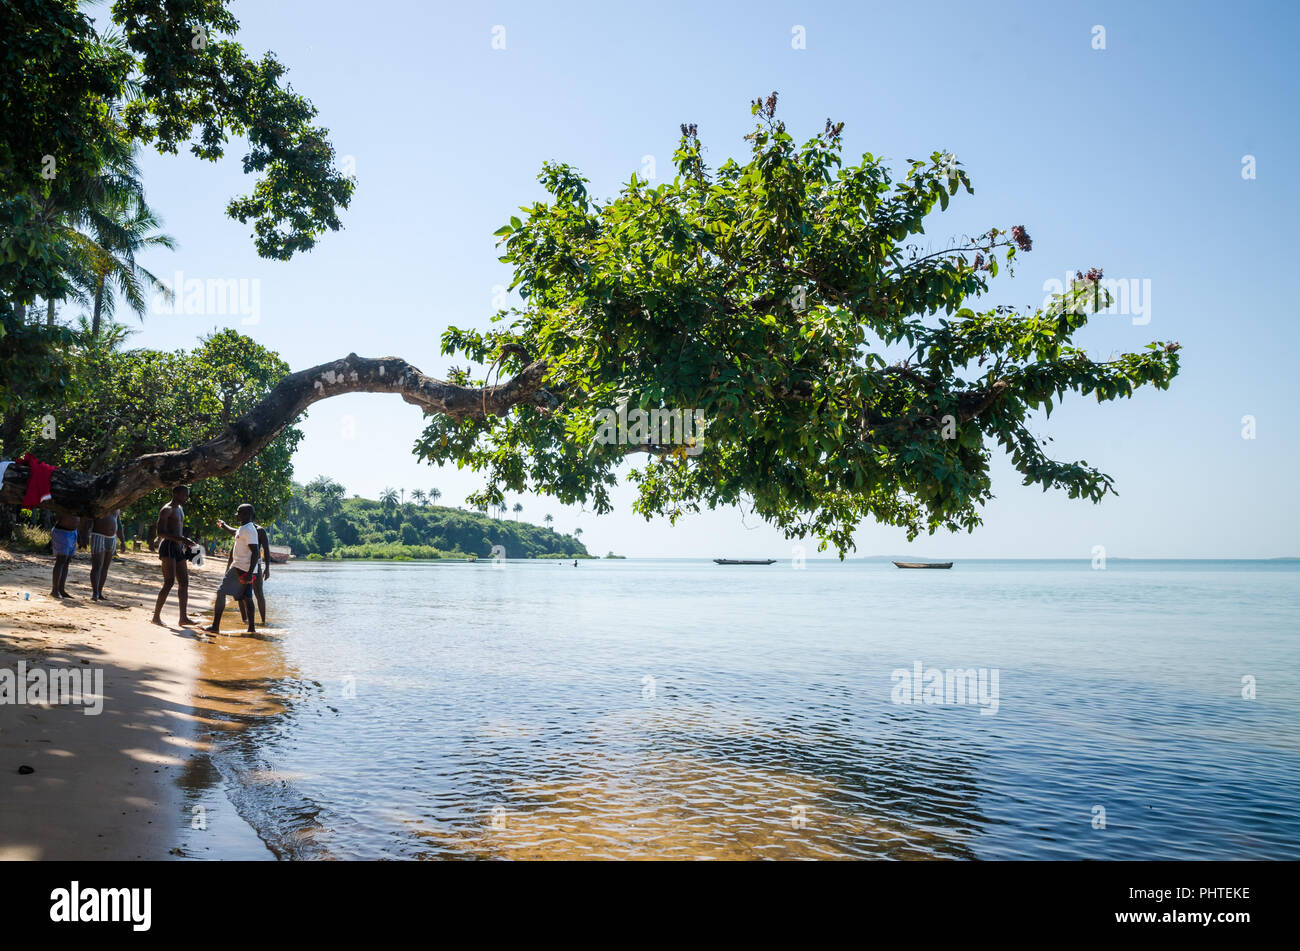 Bubaque, Guinea Bissau - December 07, 2013: Beautiful landscape of tree growing over ocean at beach of Bijagos island Bubaque, Guinea Bissau, West Afr Stock Photo